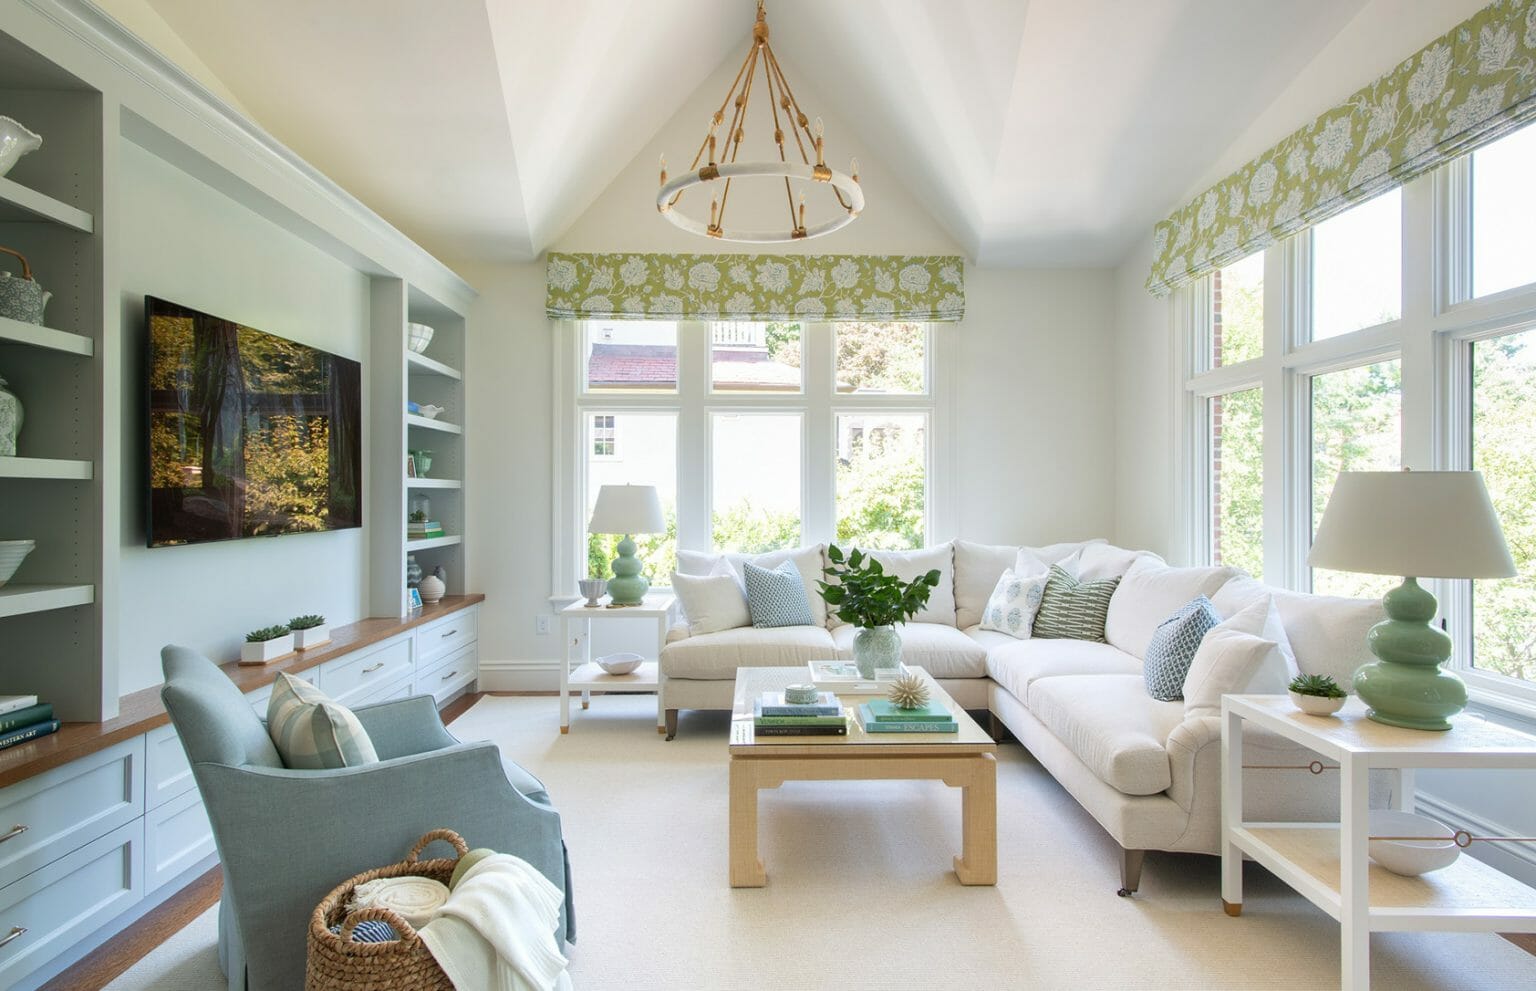 10 Top Transitional Interior Design Must-Haves for the Perfect Home